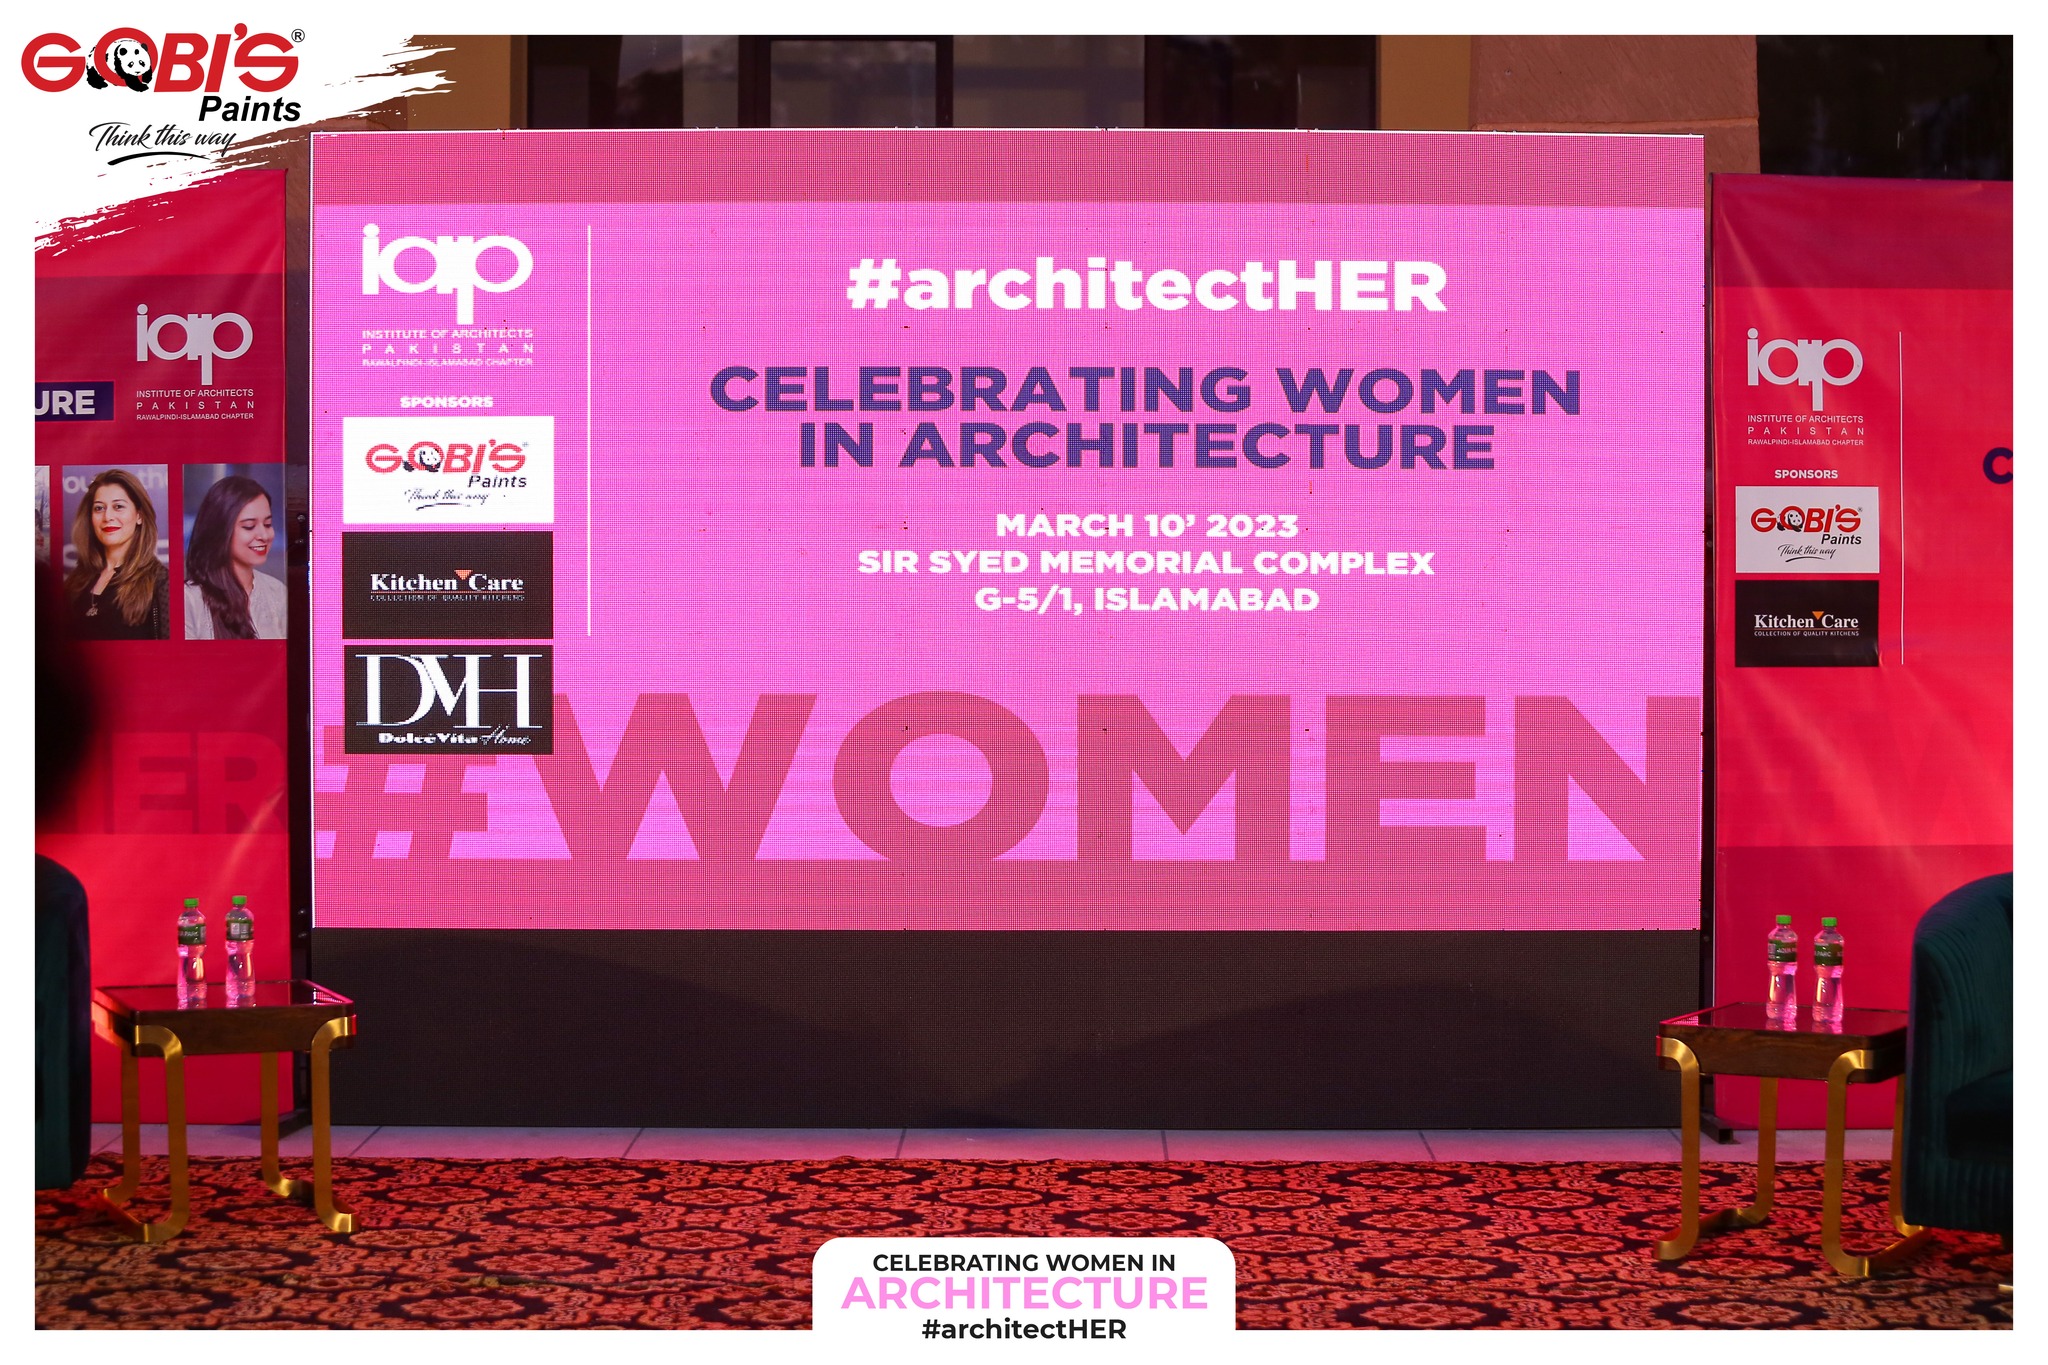 Gobi’s Paints and Institute of Architects, Pakistan came together to honor the exceptional women in architecture